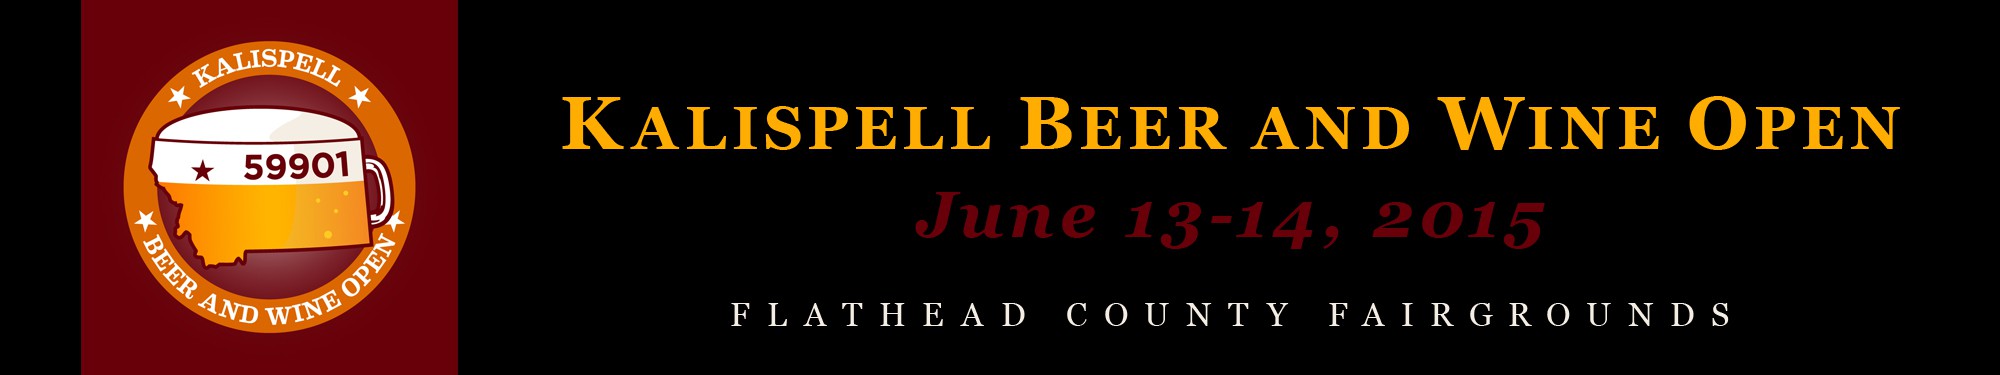 Kalispell Beer and Wine Open Festival, June 13th-14th, 2015